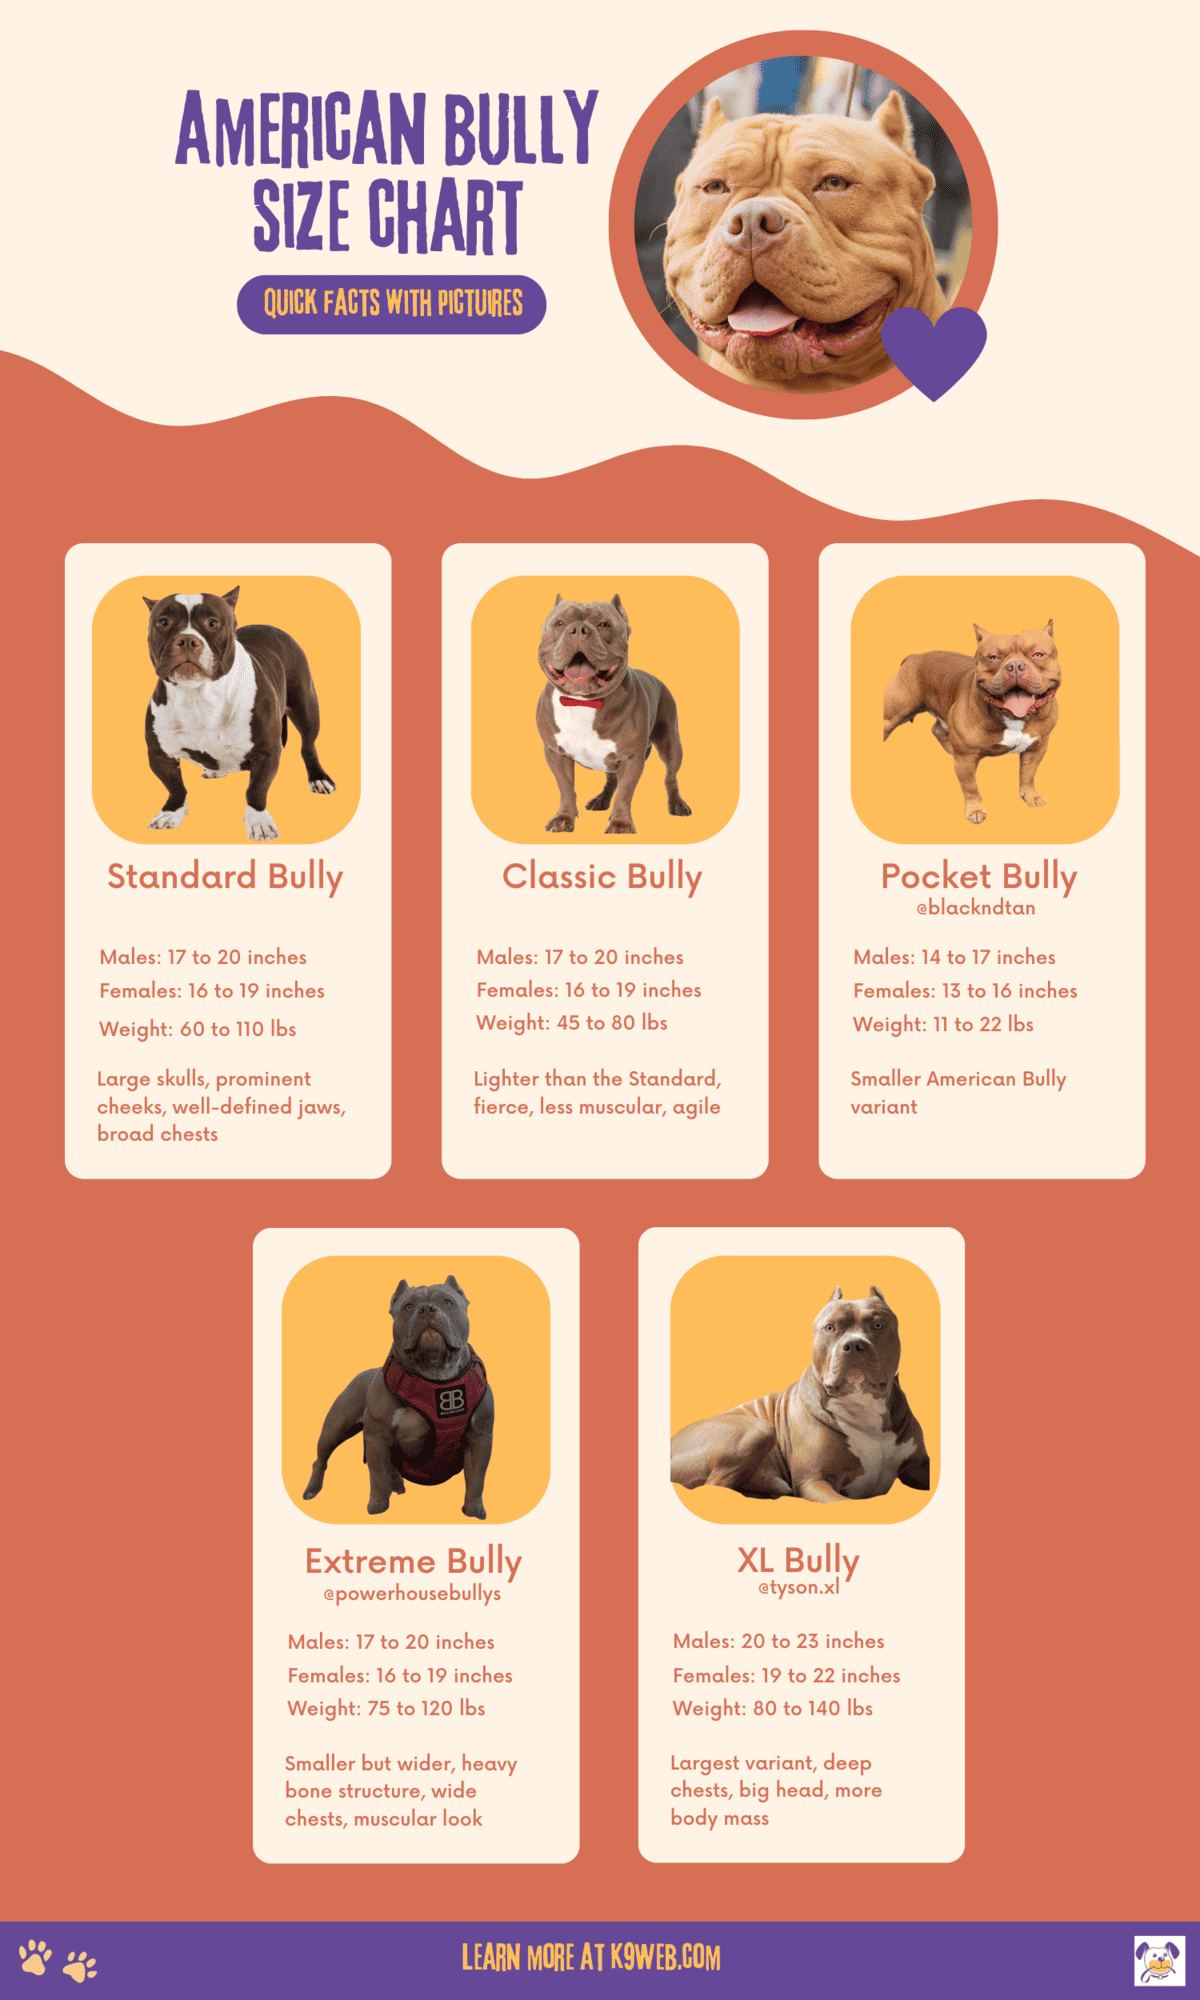 American Bully Size Chart Infographic